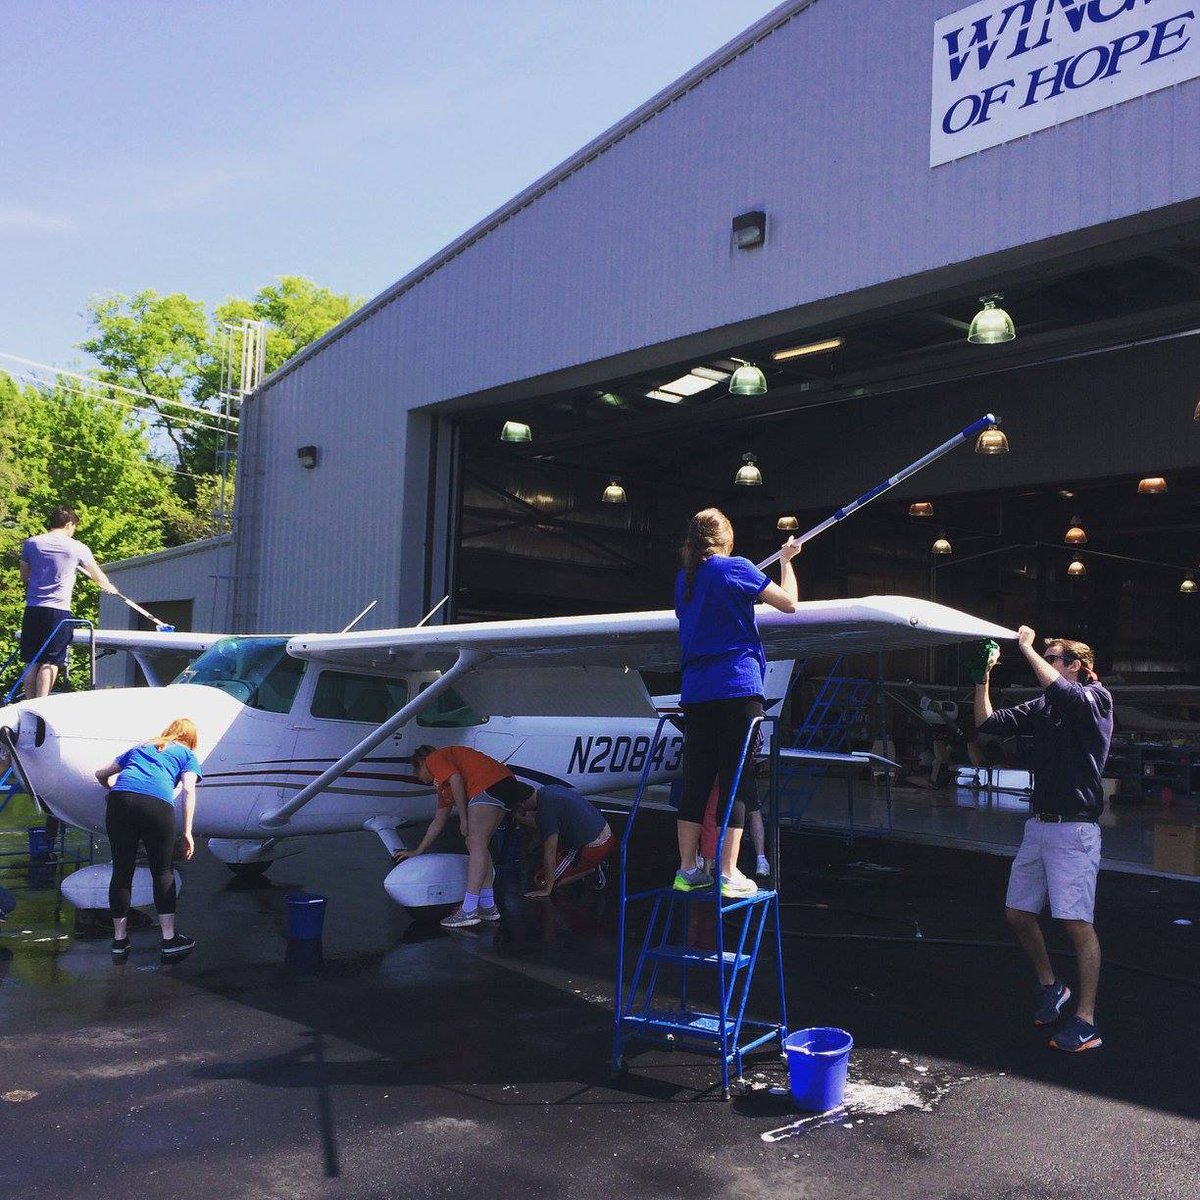 Great day for washing planes at Wings of Hope! Thx to Alpha Eta Rho SLU chapter, Young Ambassadors & volunteer crew!